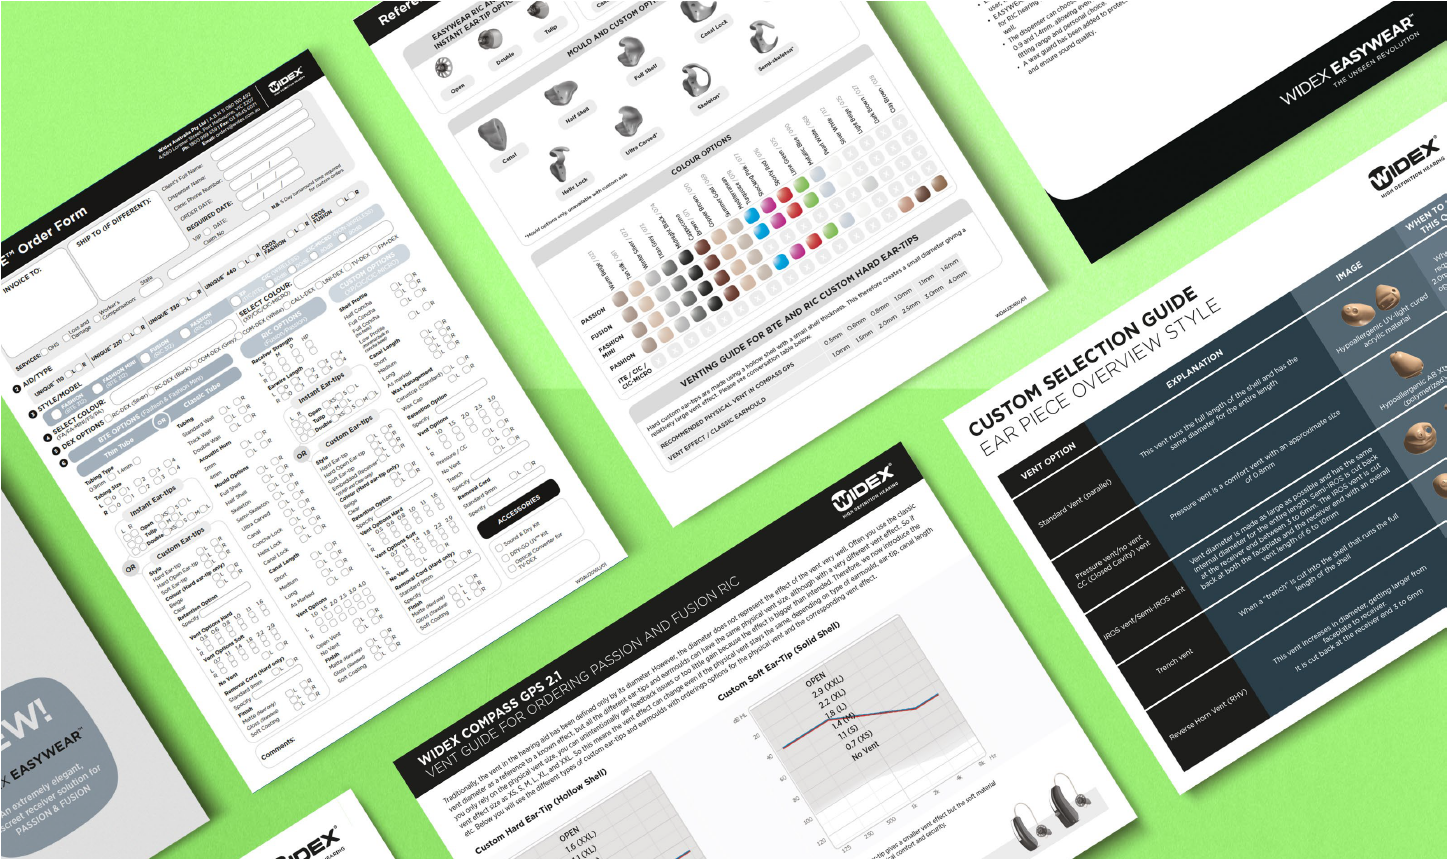 Graphic Design Product Guides by Zoe Moncaster at ZoeByDesign